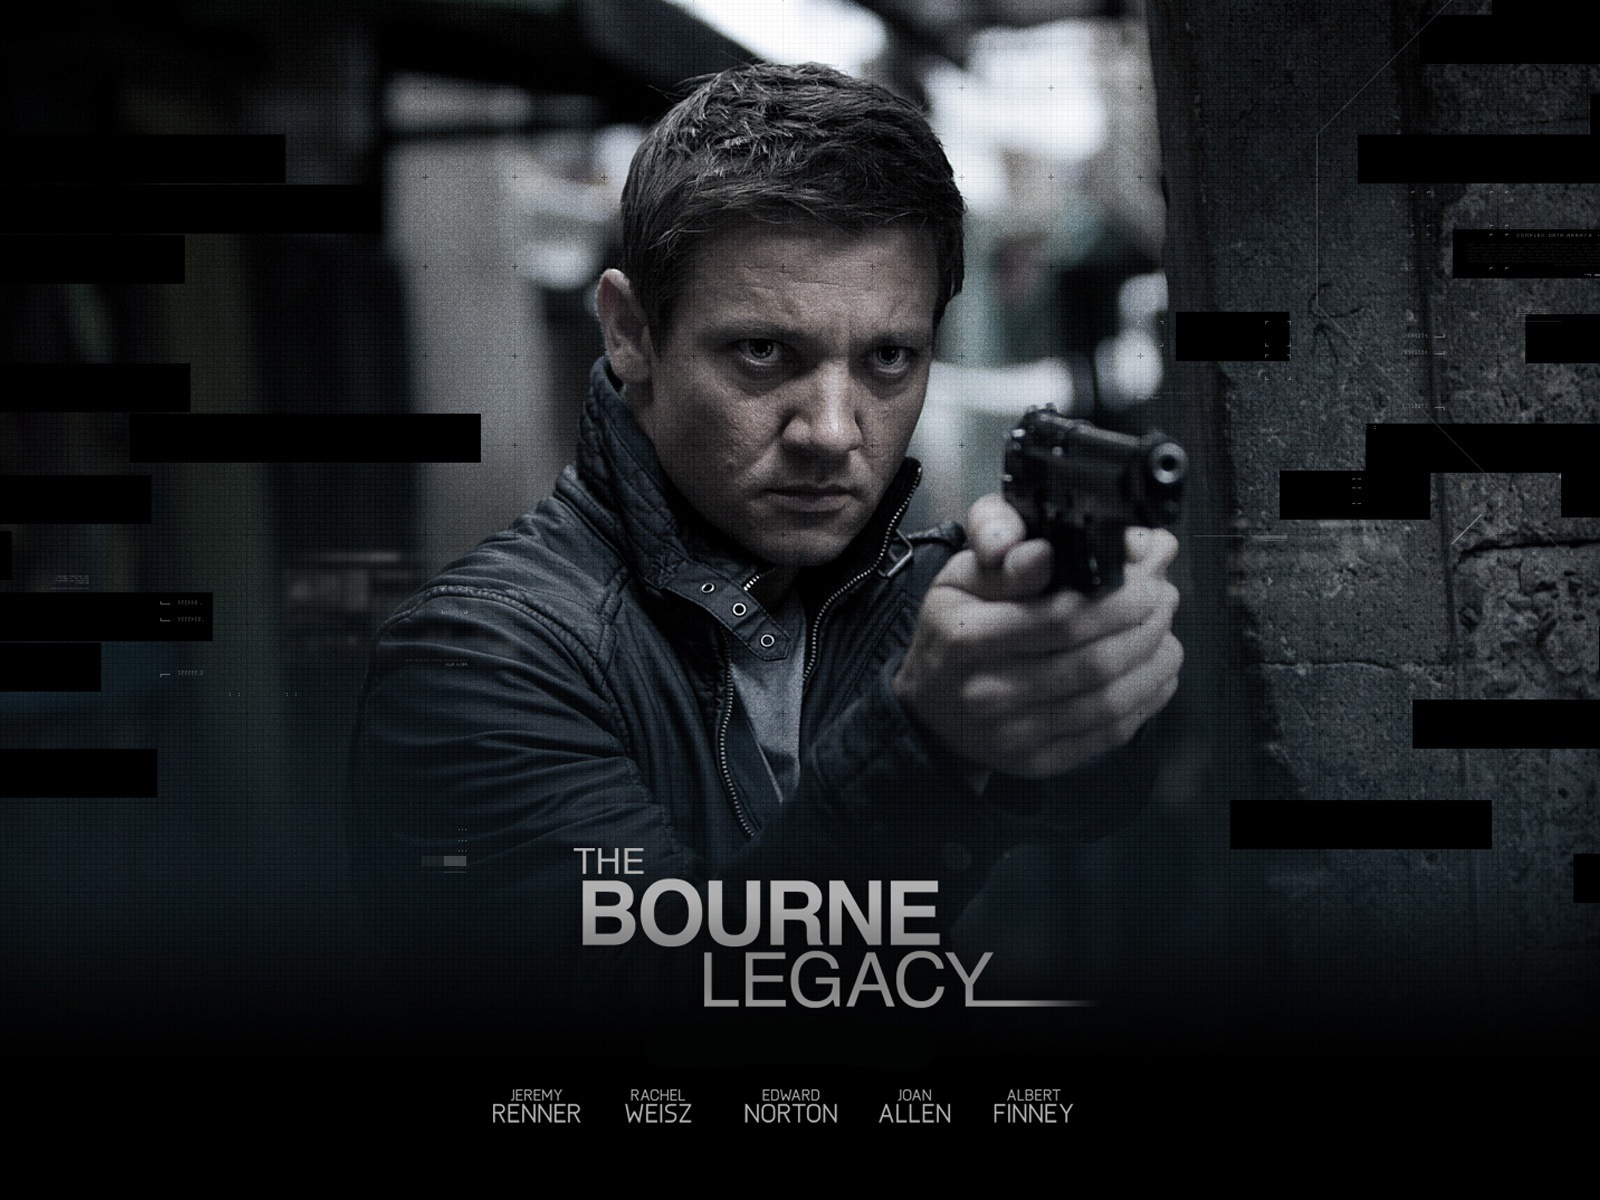 The Bourne Legacy HD wallpapers #2 - 1600x1200